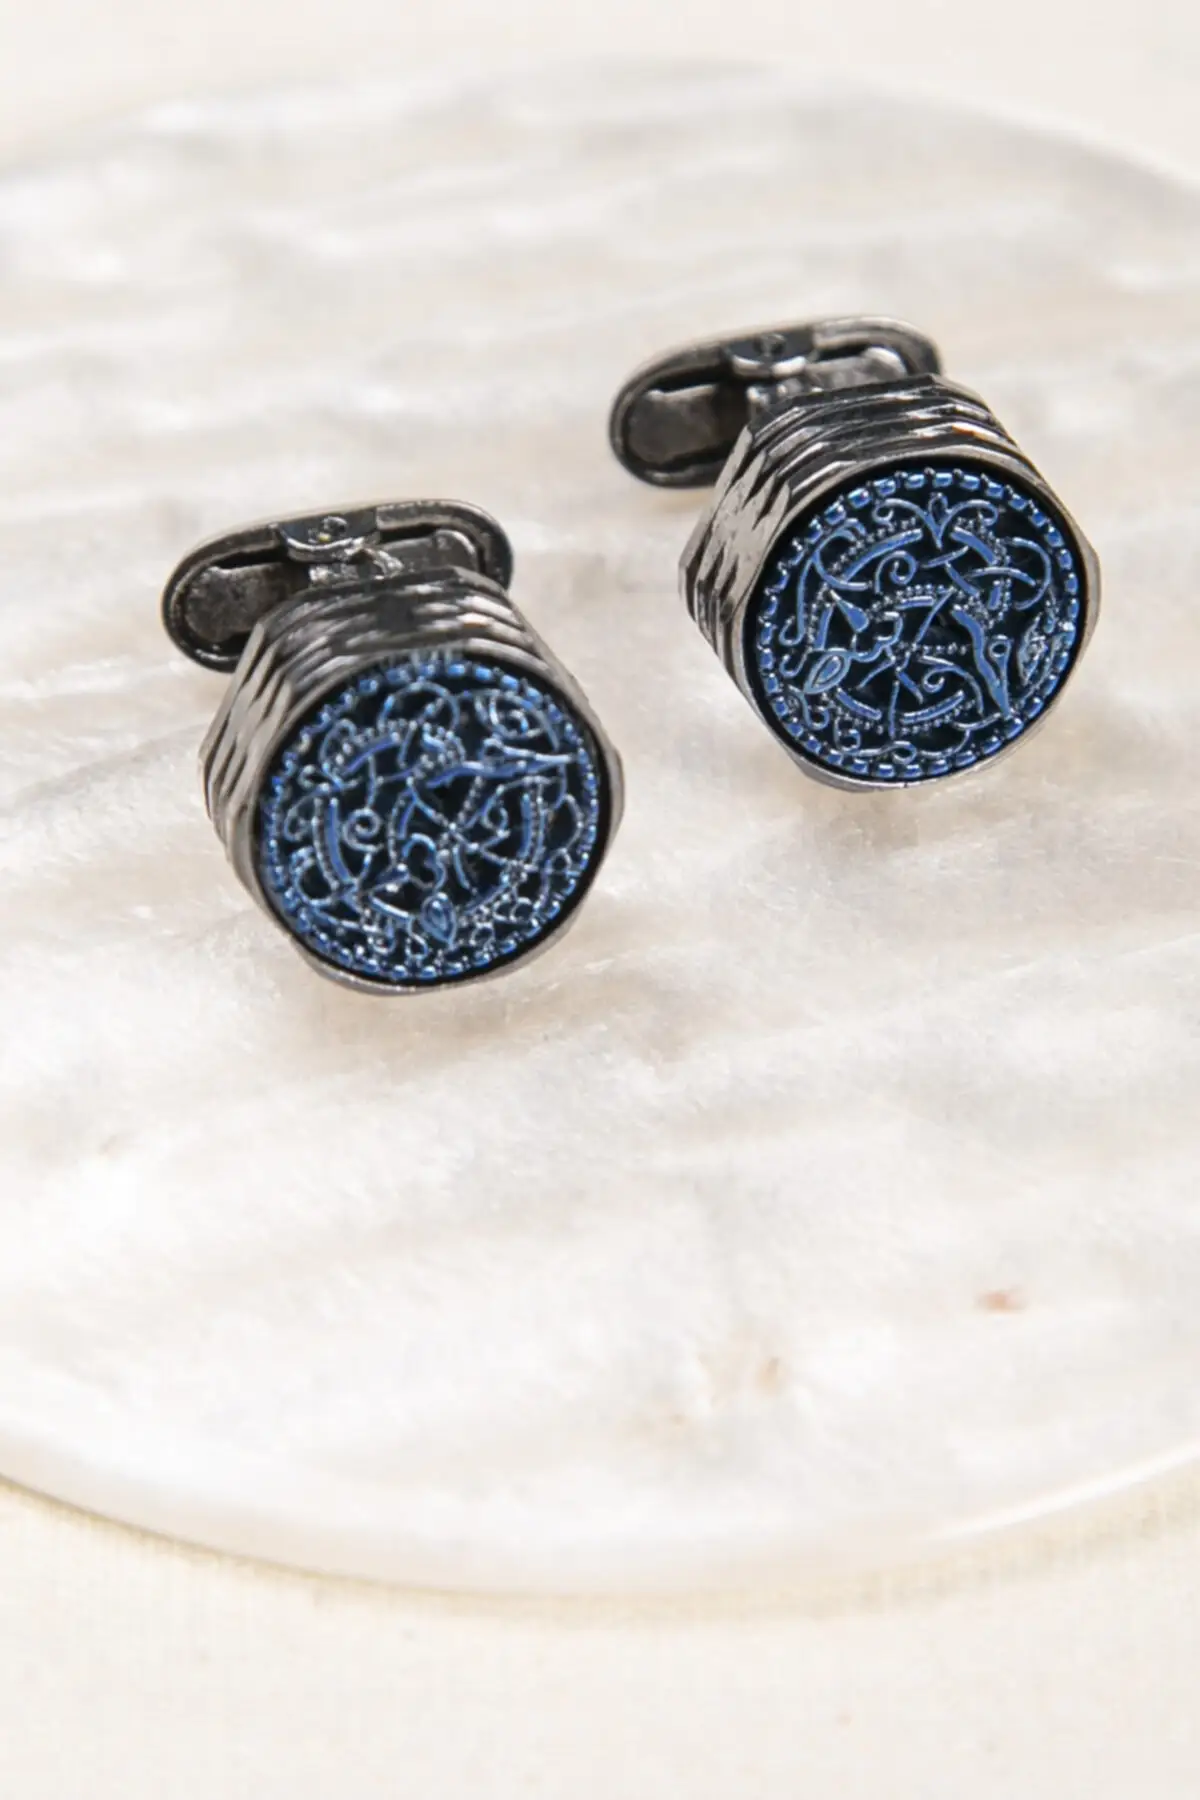 Angular Blue Embroidered Cufflinks Standard-Fit-Classic Clothing 2021 - 2022 Winter, Gentleman, For Gift, Free Shipping